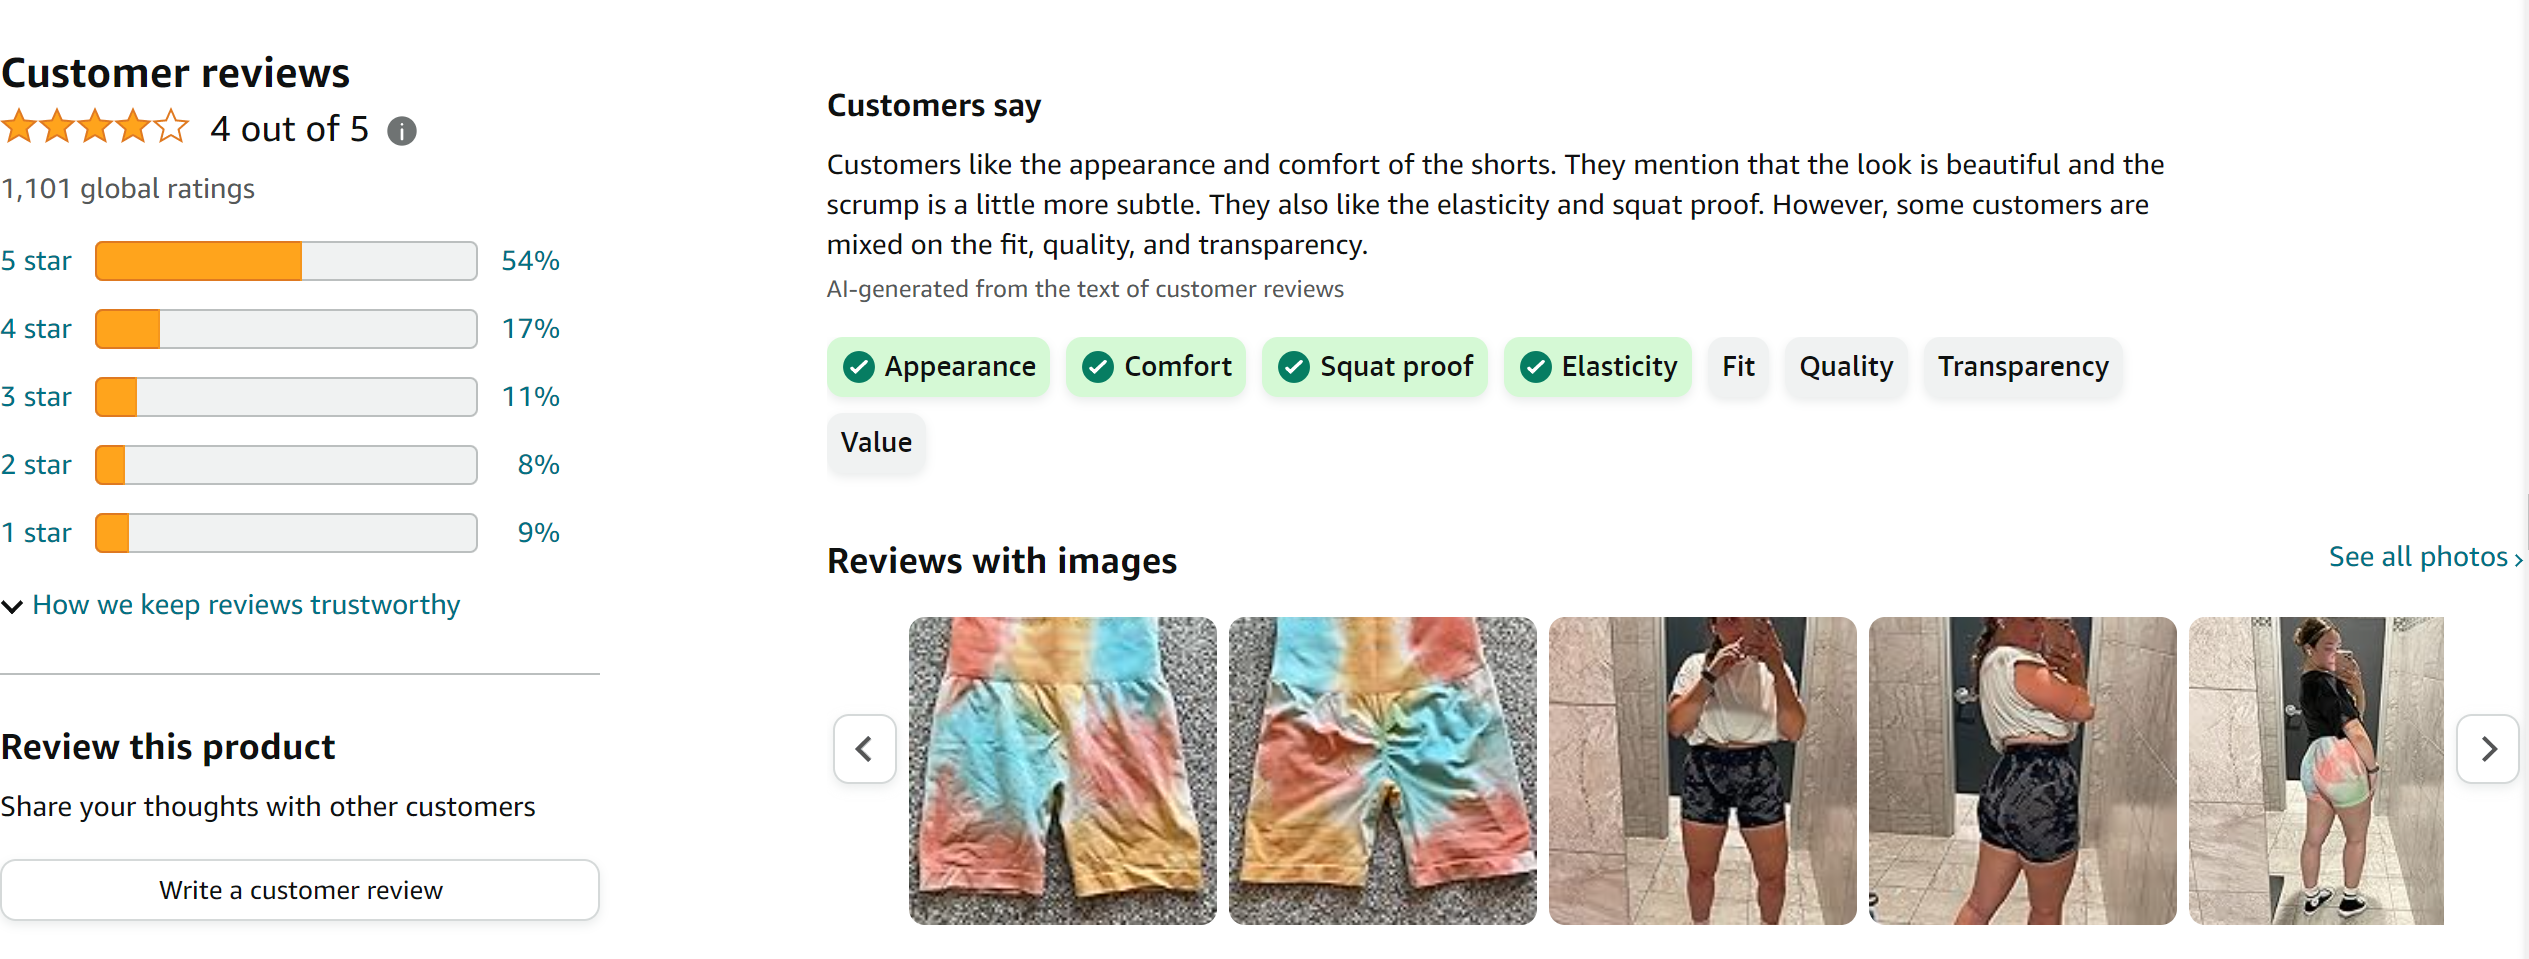 MAXXIM Women's High-Waisted Seamless Compression Biker Shorts - Tie Dye and Solid Ideal for Gym, Yoga, Running, and Fitness from Amazon Reviews (screenshot taken on 2024-2-29)